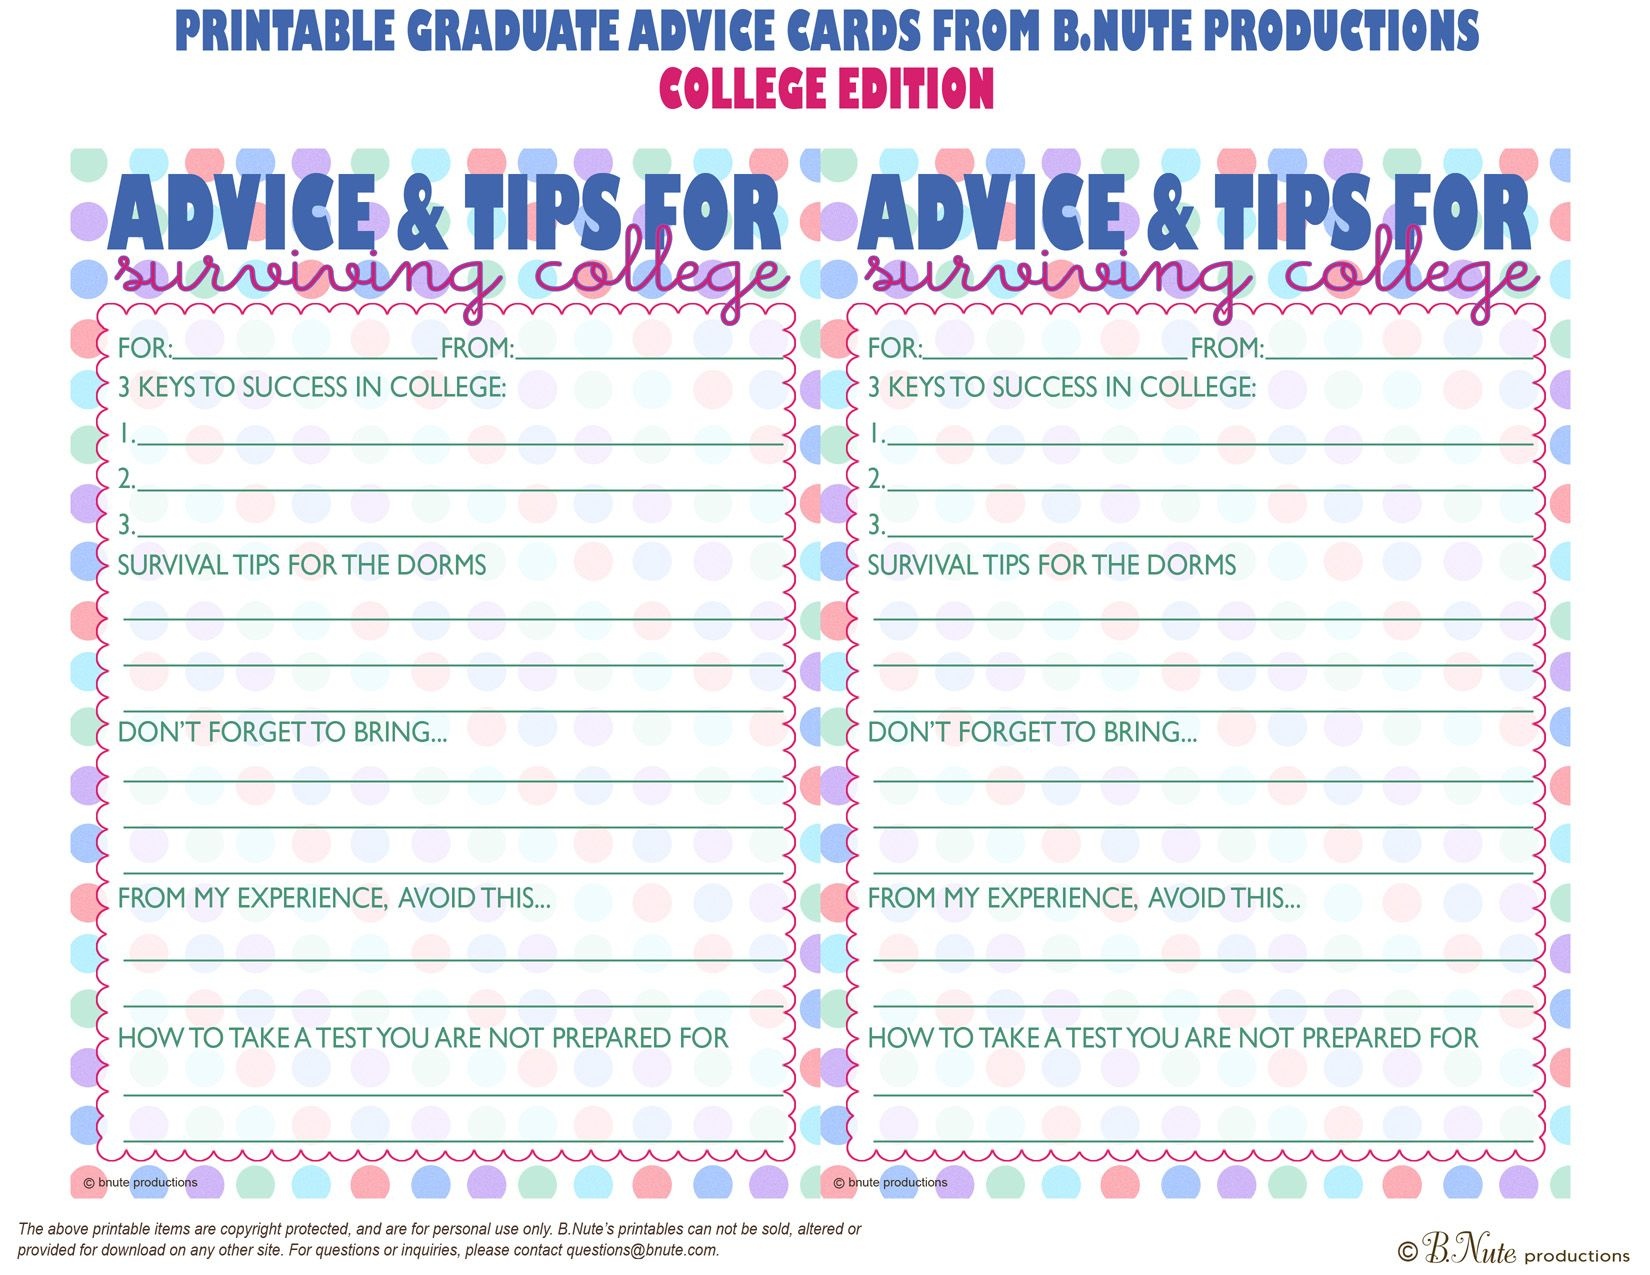 Bnute Productions: Free Printable Graduate Advice Cards - College - Free Printable Grade Cards